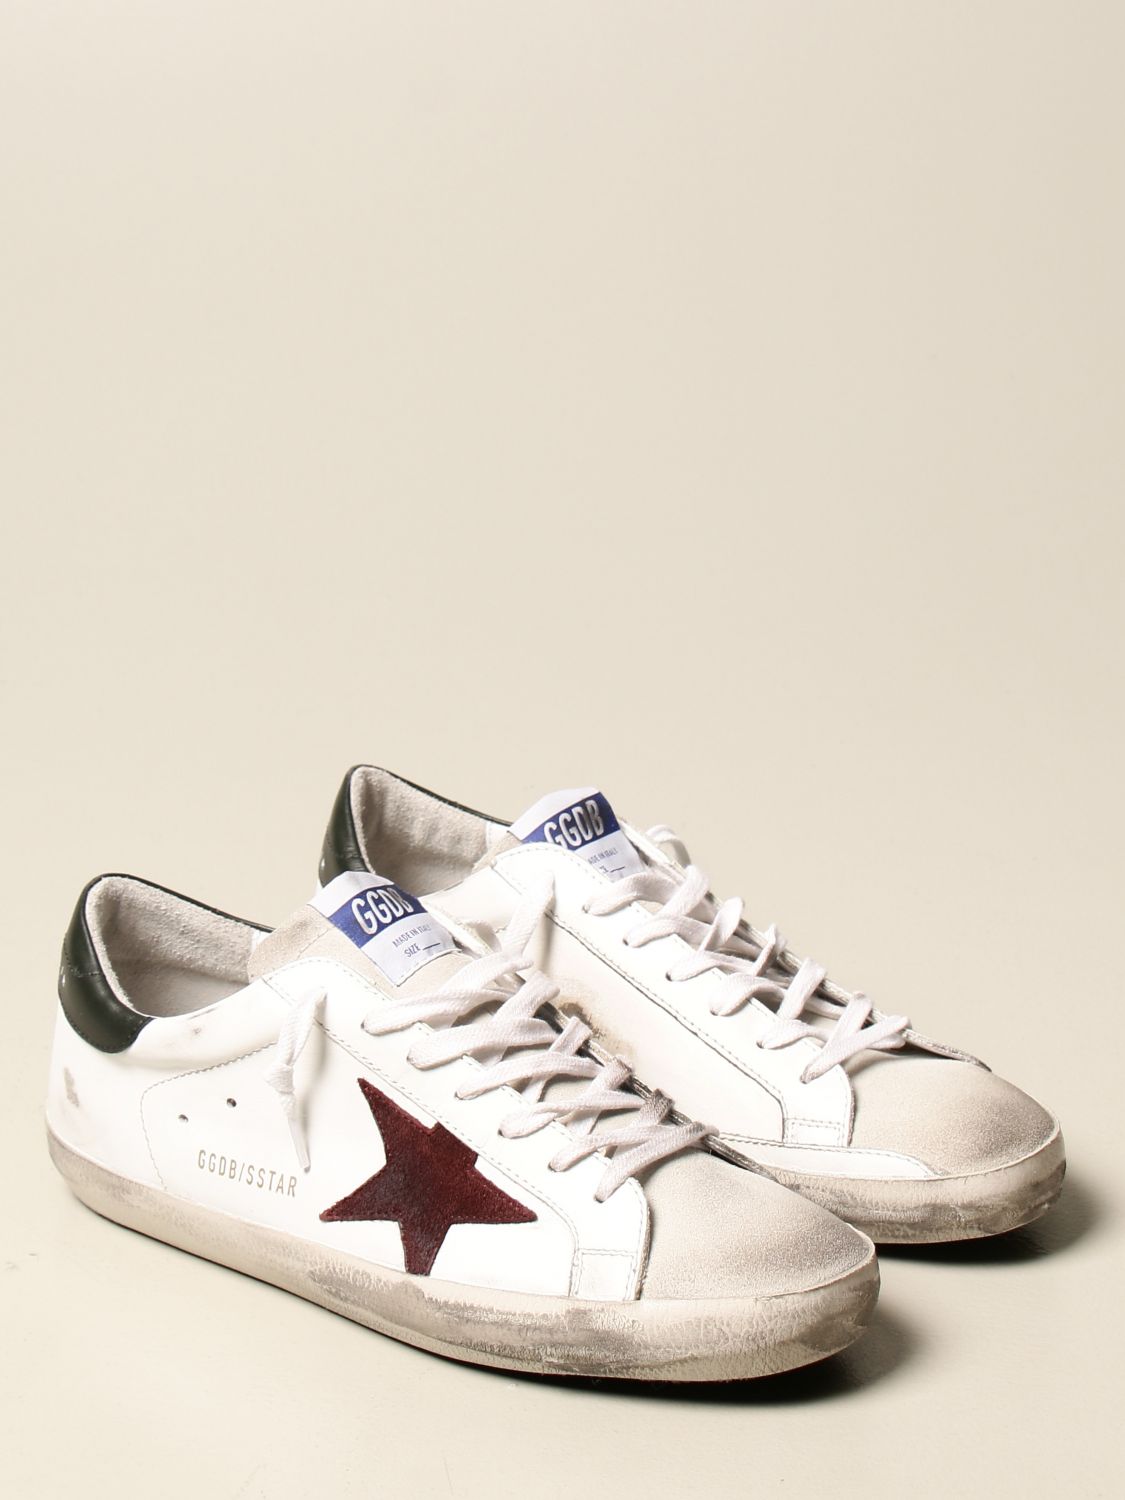 GOLDEN GOOSE: Superstar classic sneakers in leather - White | Sneakers ...